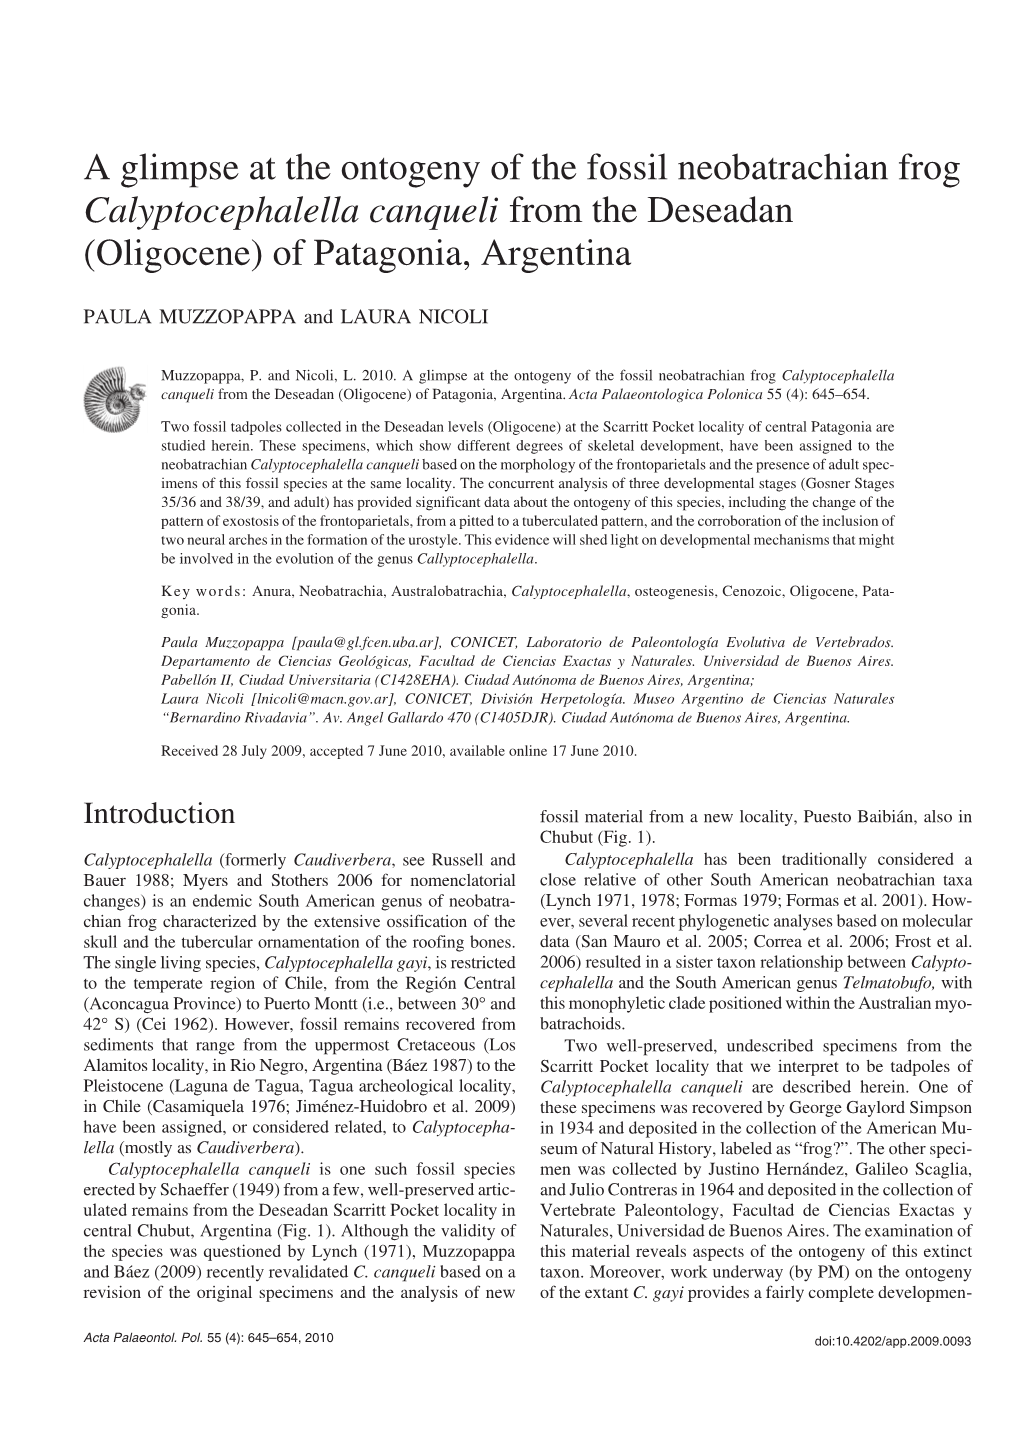 A Glimpse at the Ontogeny of the Fossil Neobatrachian Frog Calyptocephalella Canqueli from the Deseadan (Oligocene) of Patagonia, Argentina